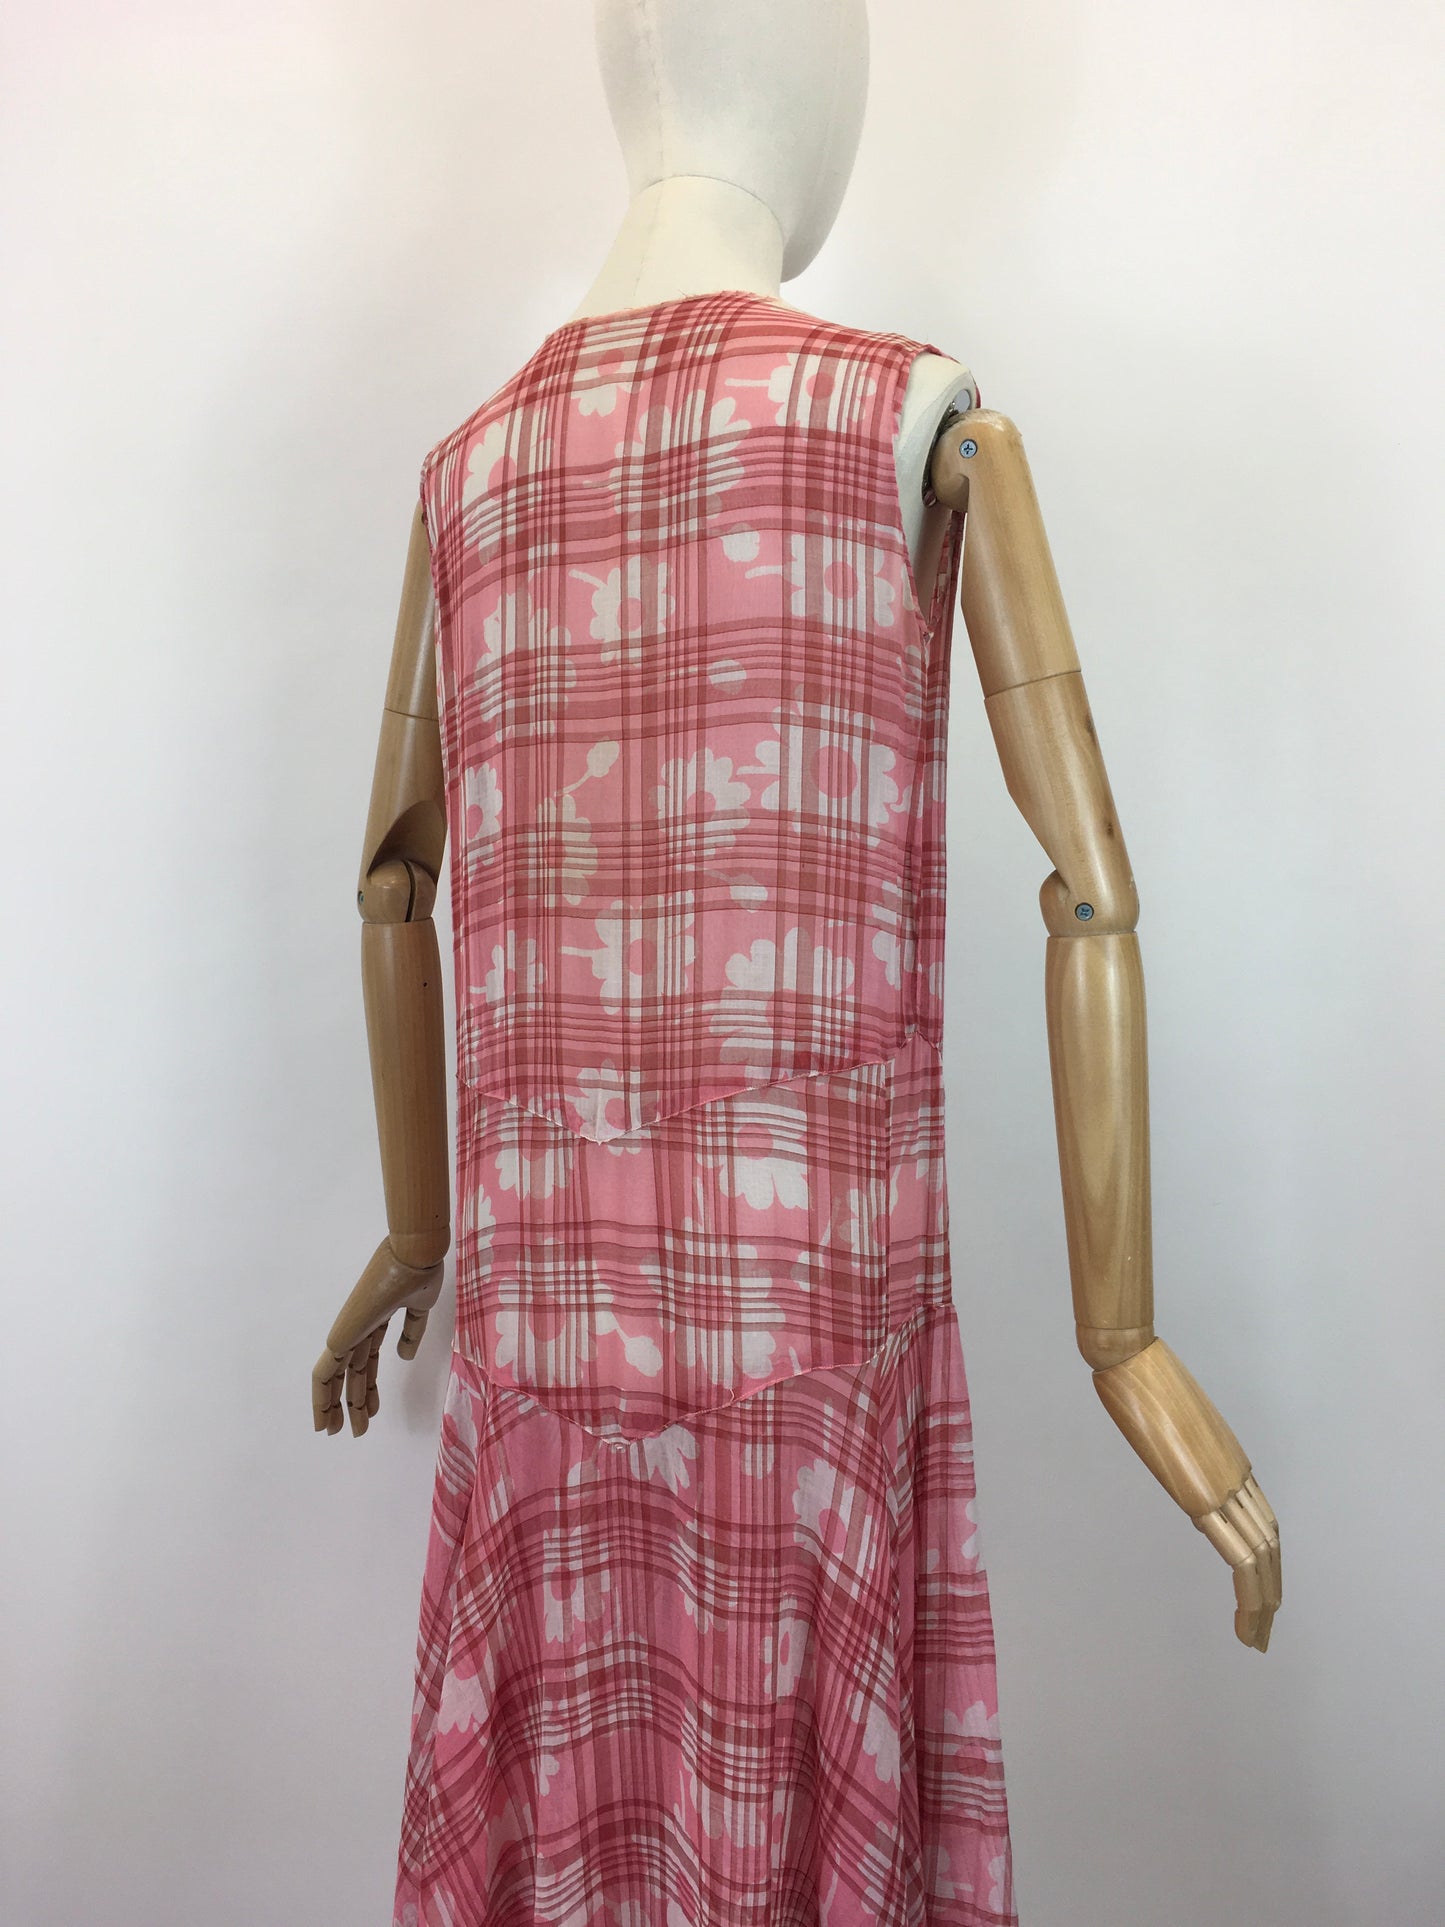 Original 1920's Darling Cotton Lawn Day Dress - In A Rose Pink Floral and Plaid Cloth